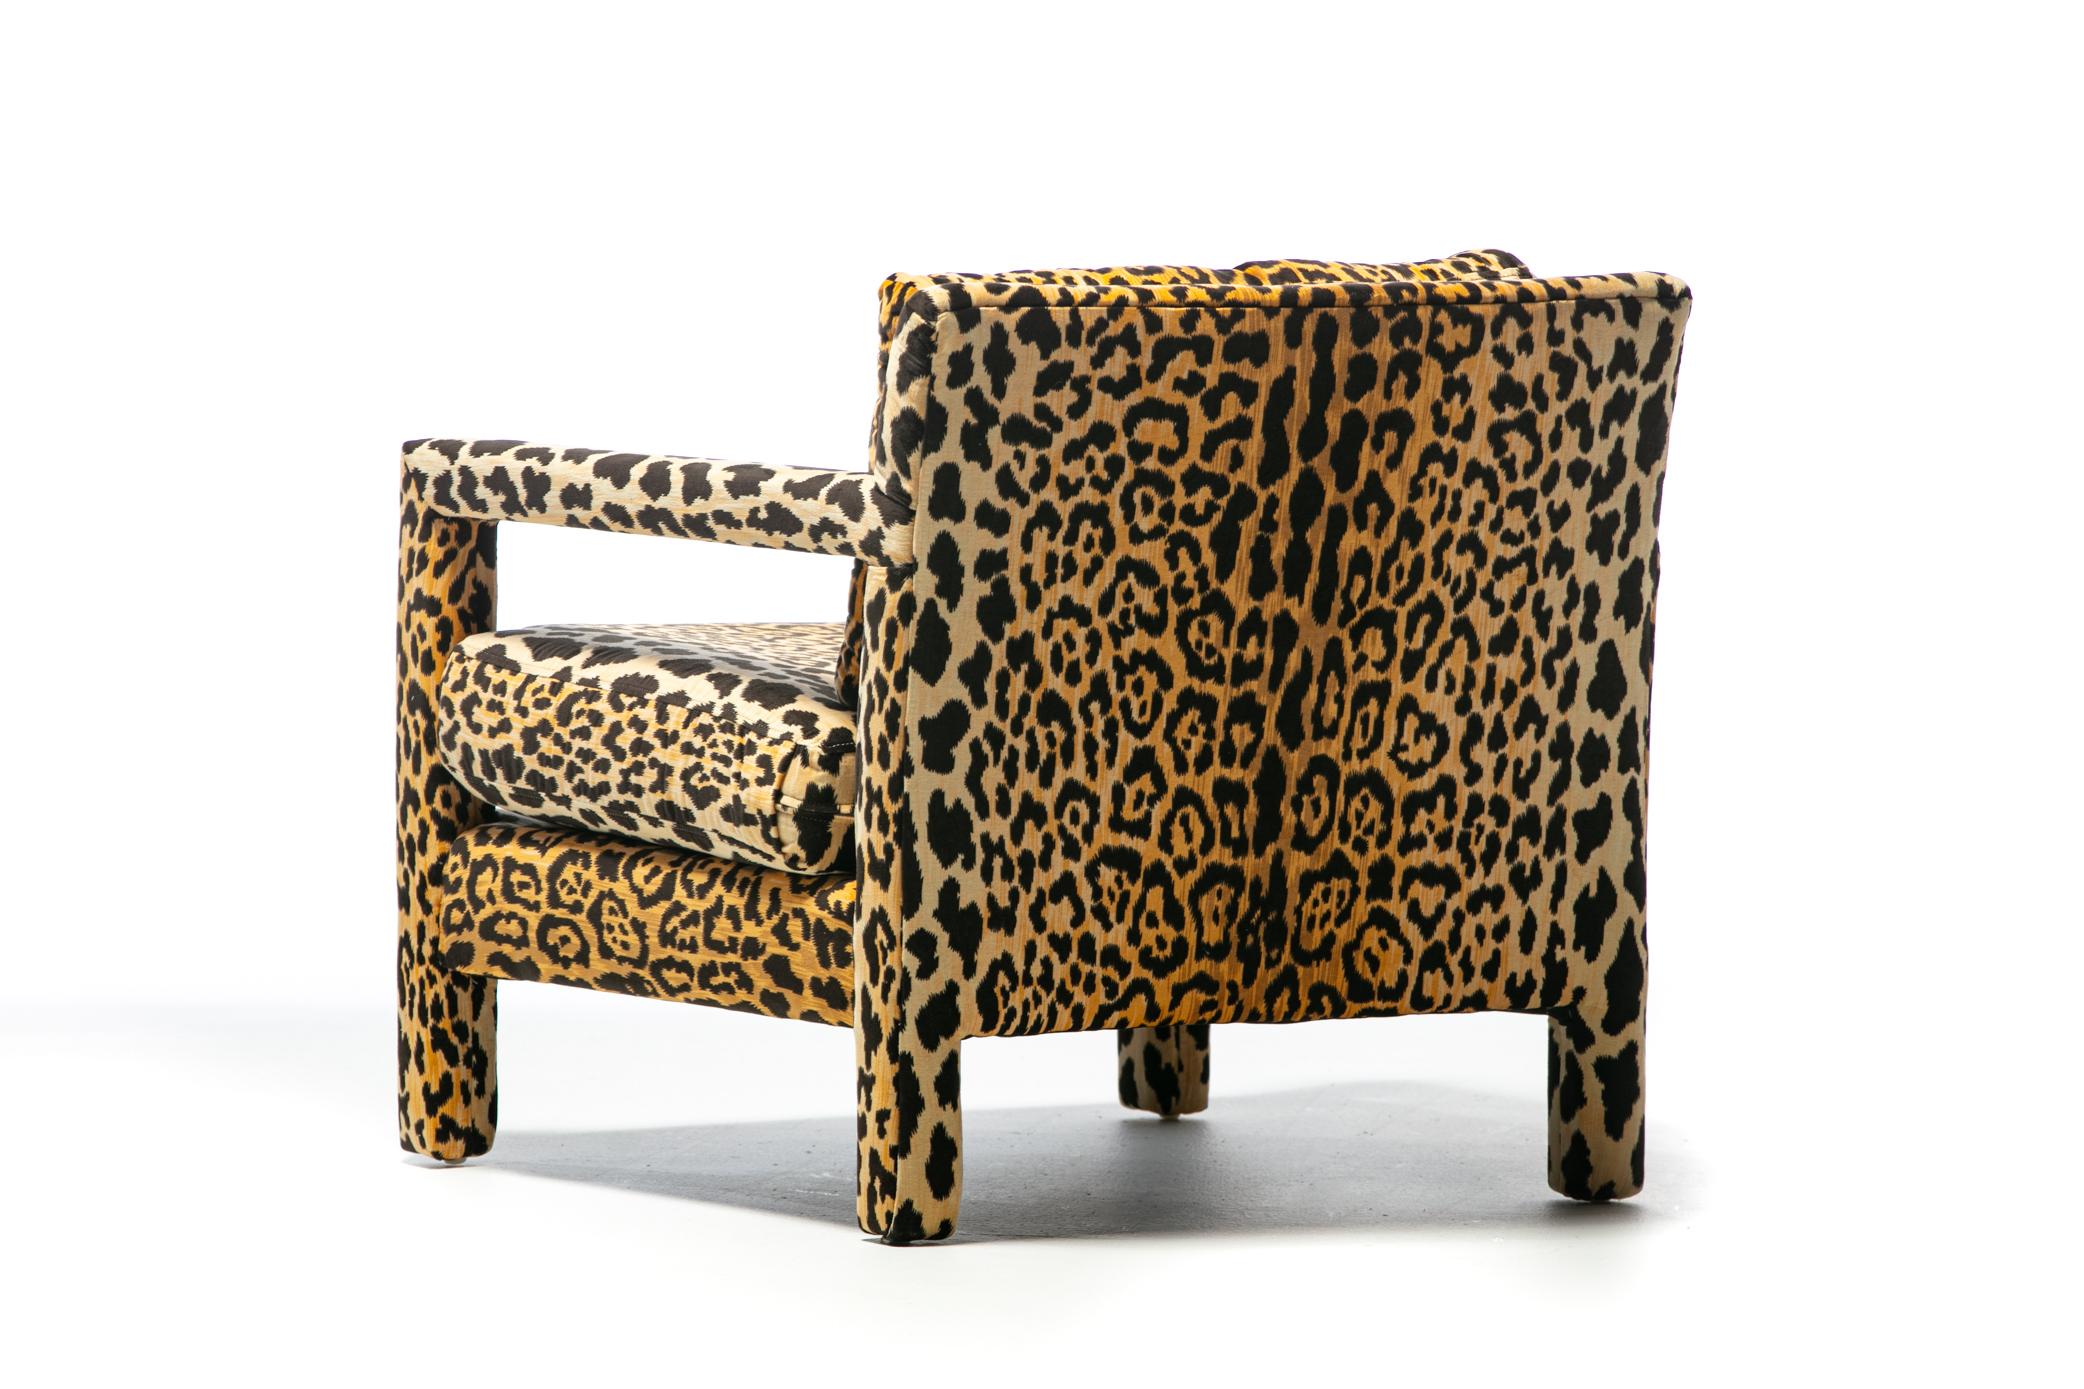 Pair of Milo Baughman Style Mid Century Parsons Chairs in Leopard Velvet c. 1970 For Sale 6